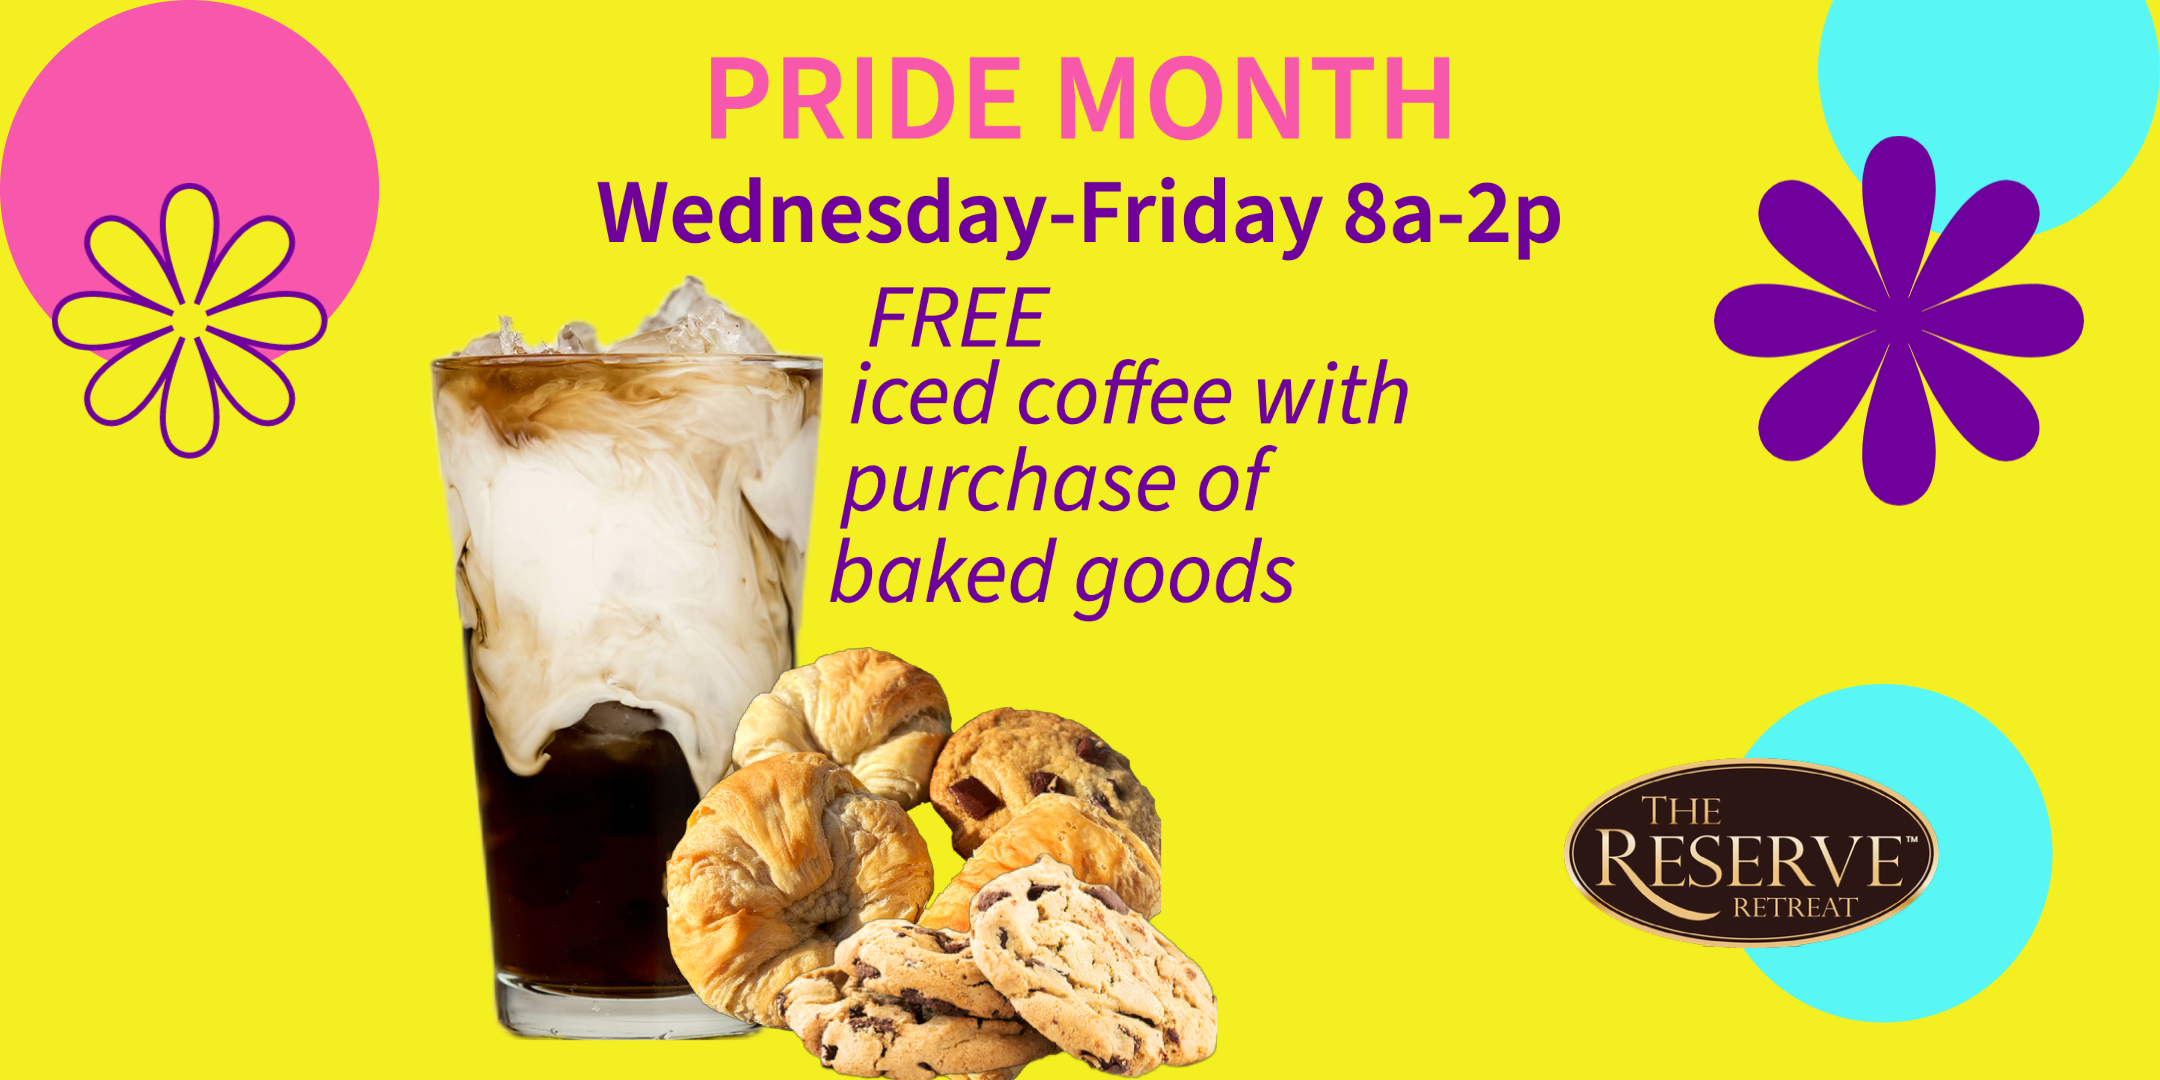 Free iced coffee with purchase of pastry Wednesdays during June - Pride Month - at The Reserve Retreat, Sarasota FL